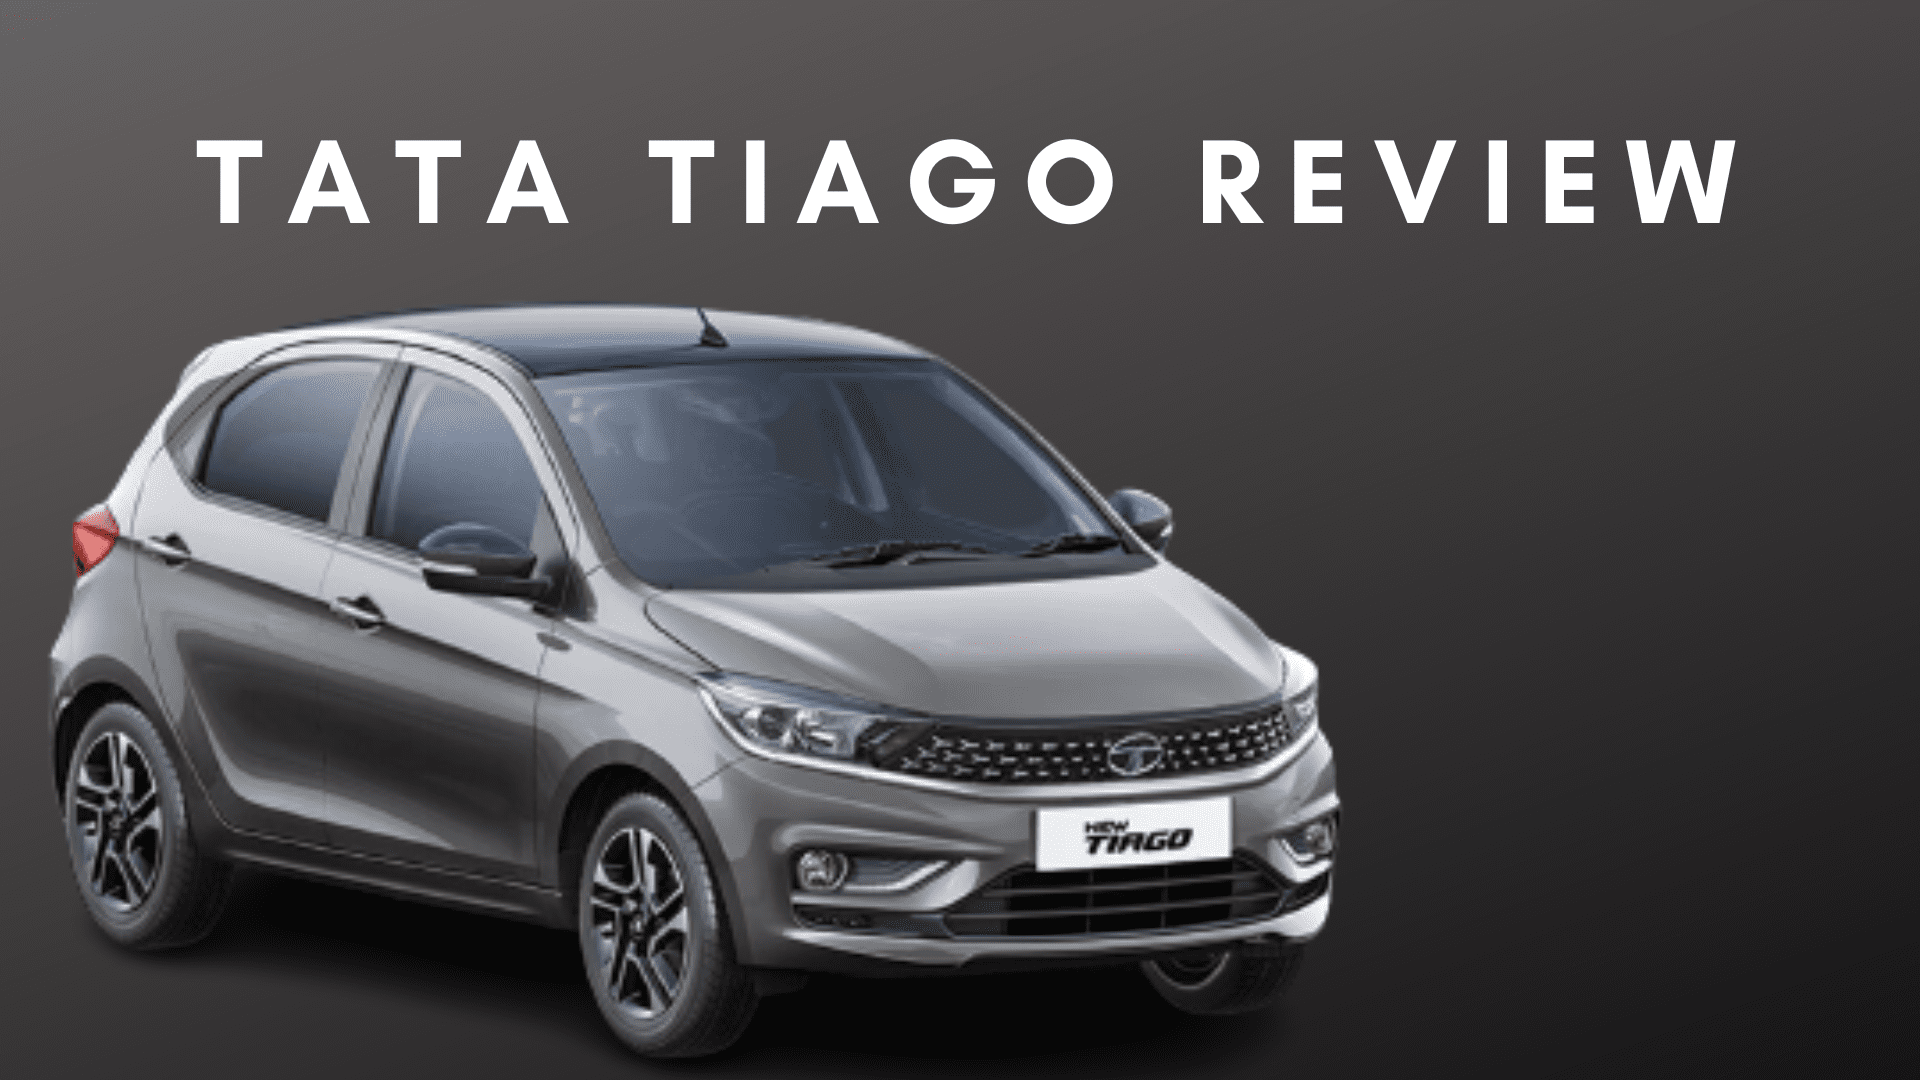 Tata Tiago CNG: An Affordable Yet Power-Packed Hatchback